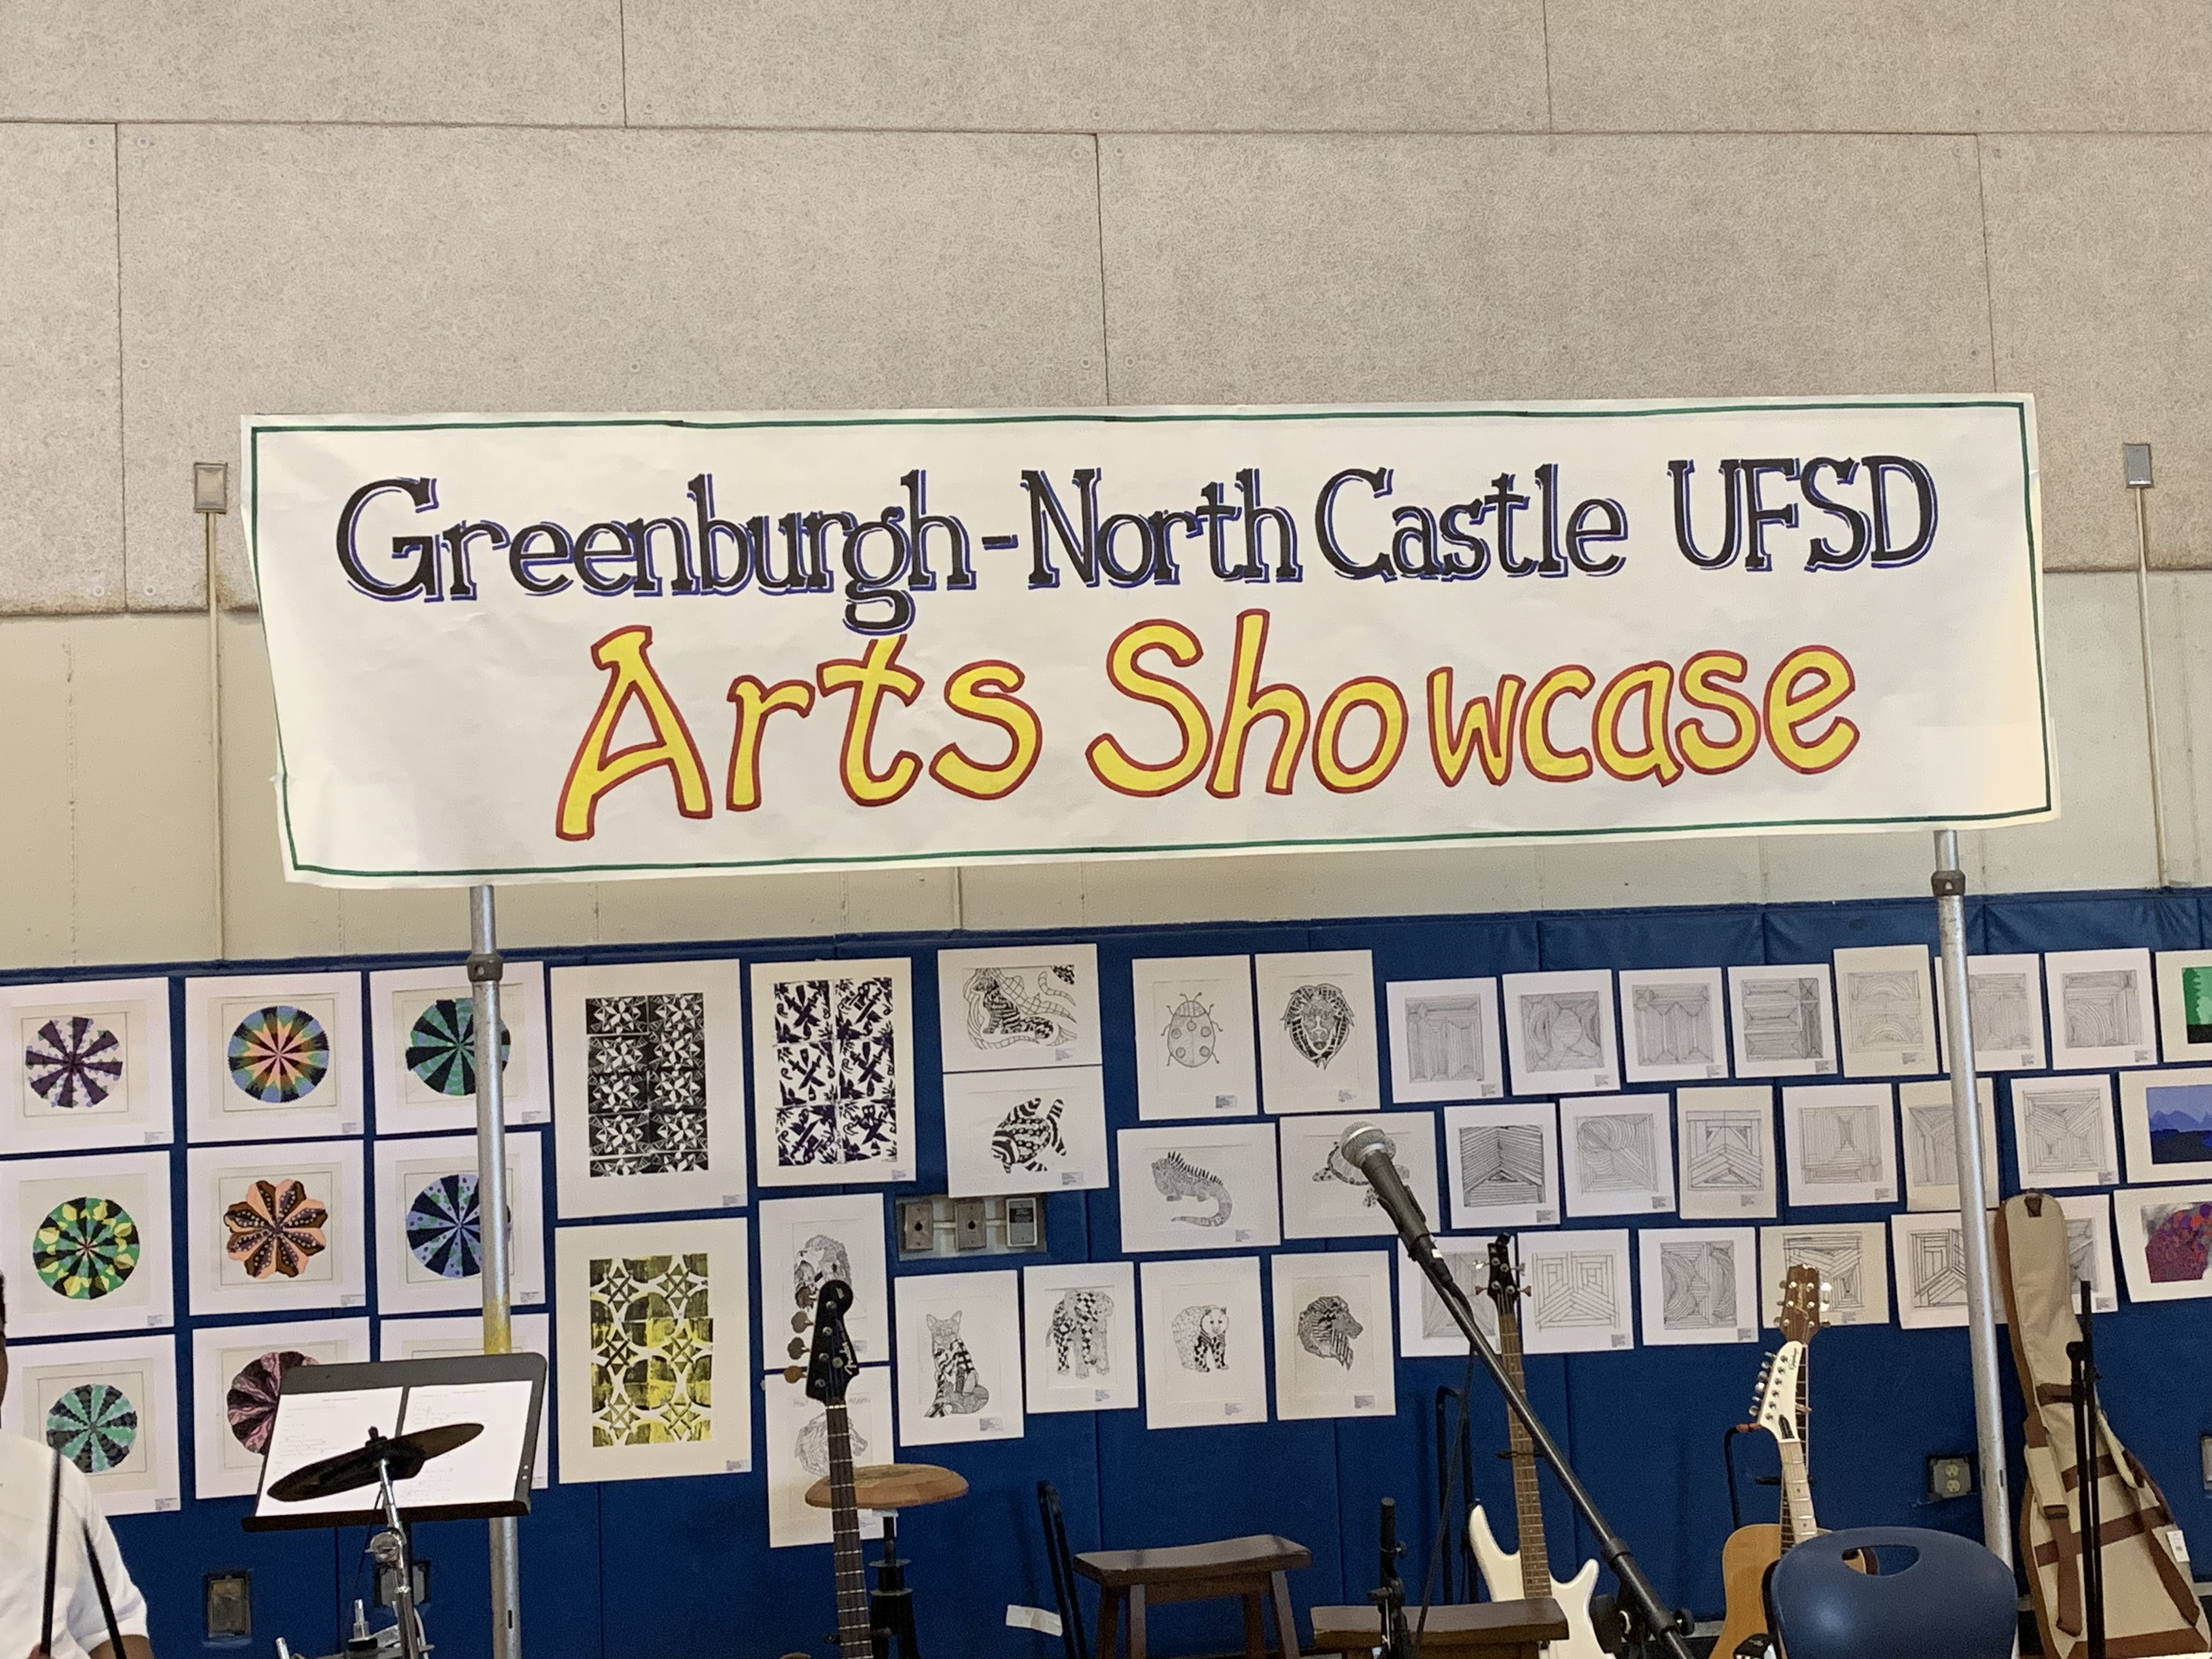 The GNC Arts Showcase sign hangs above student artwork on display along with various instruments